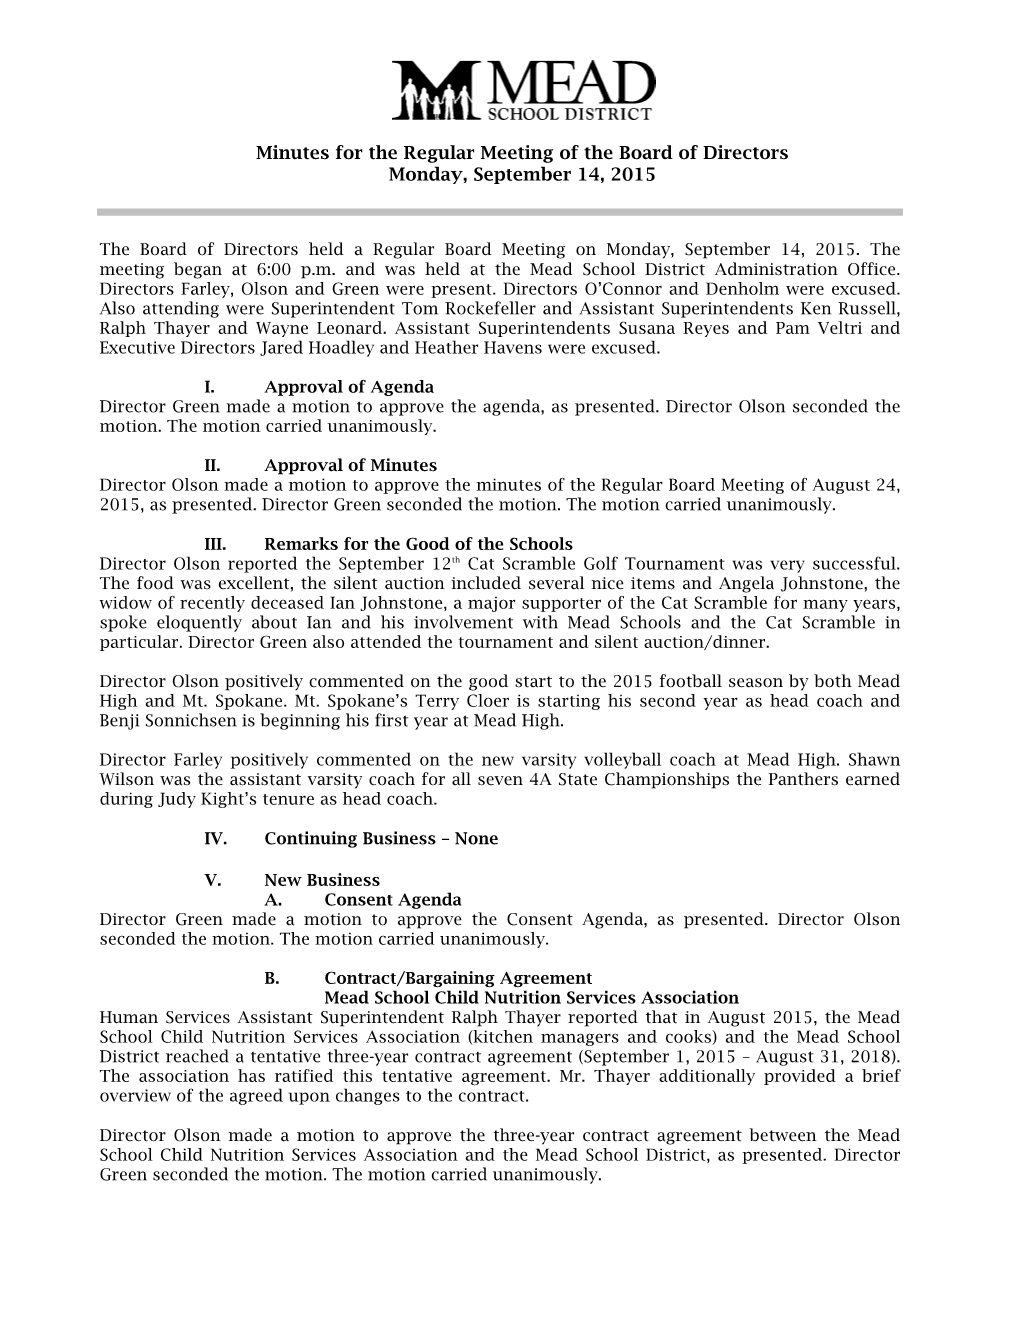 Minutes for the Regular Meeting of the Board of Directors Monday, September 14, 2015